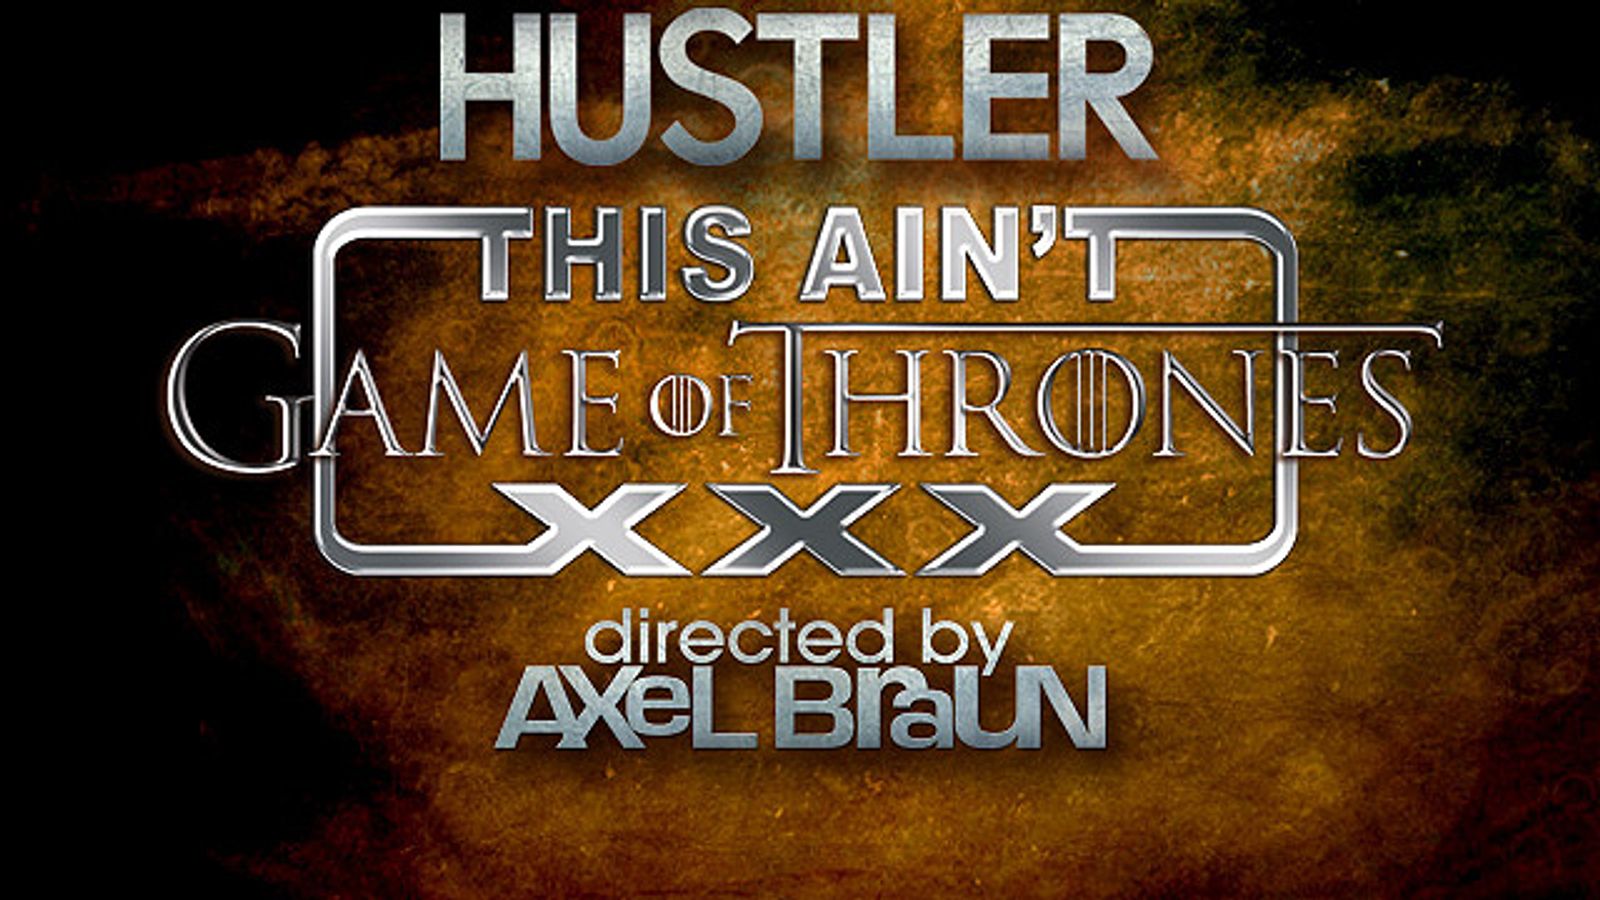 Hustler Sets Early 2014 Street Date for 'Game of Thrones XXX’